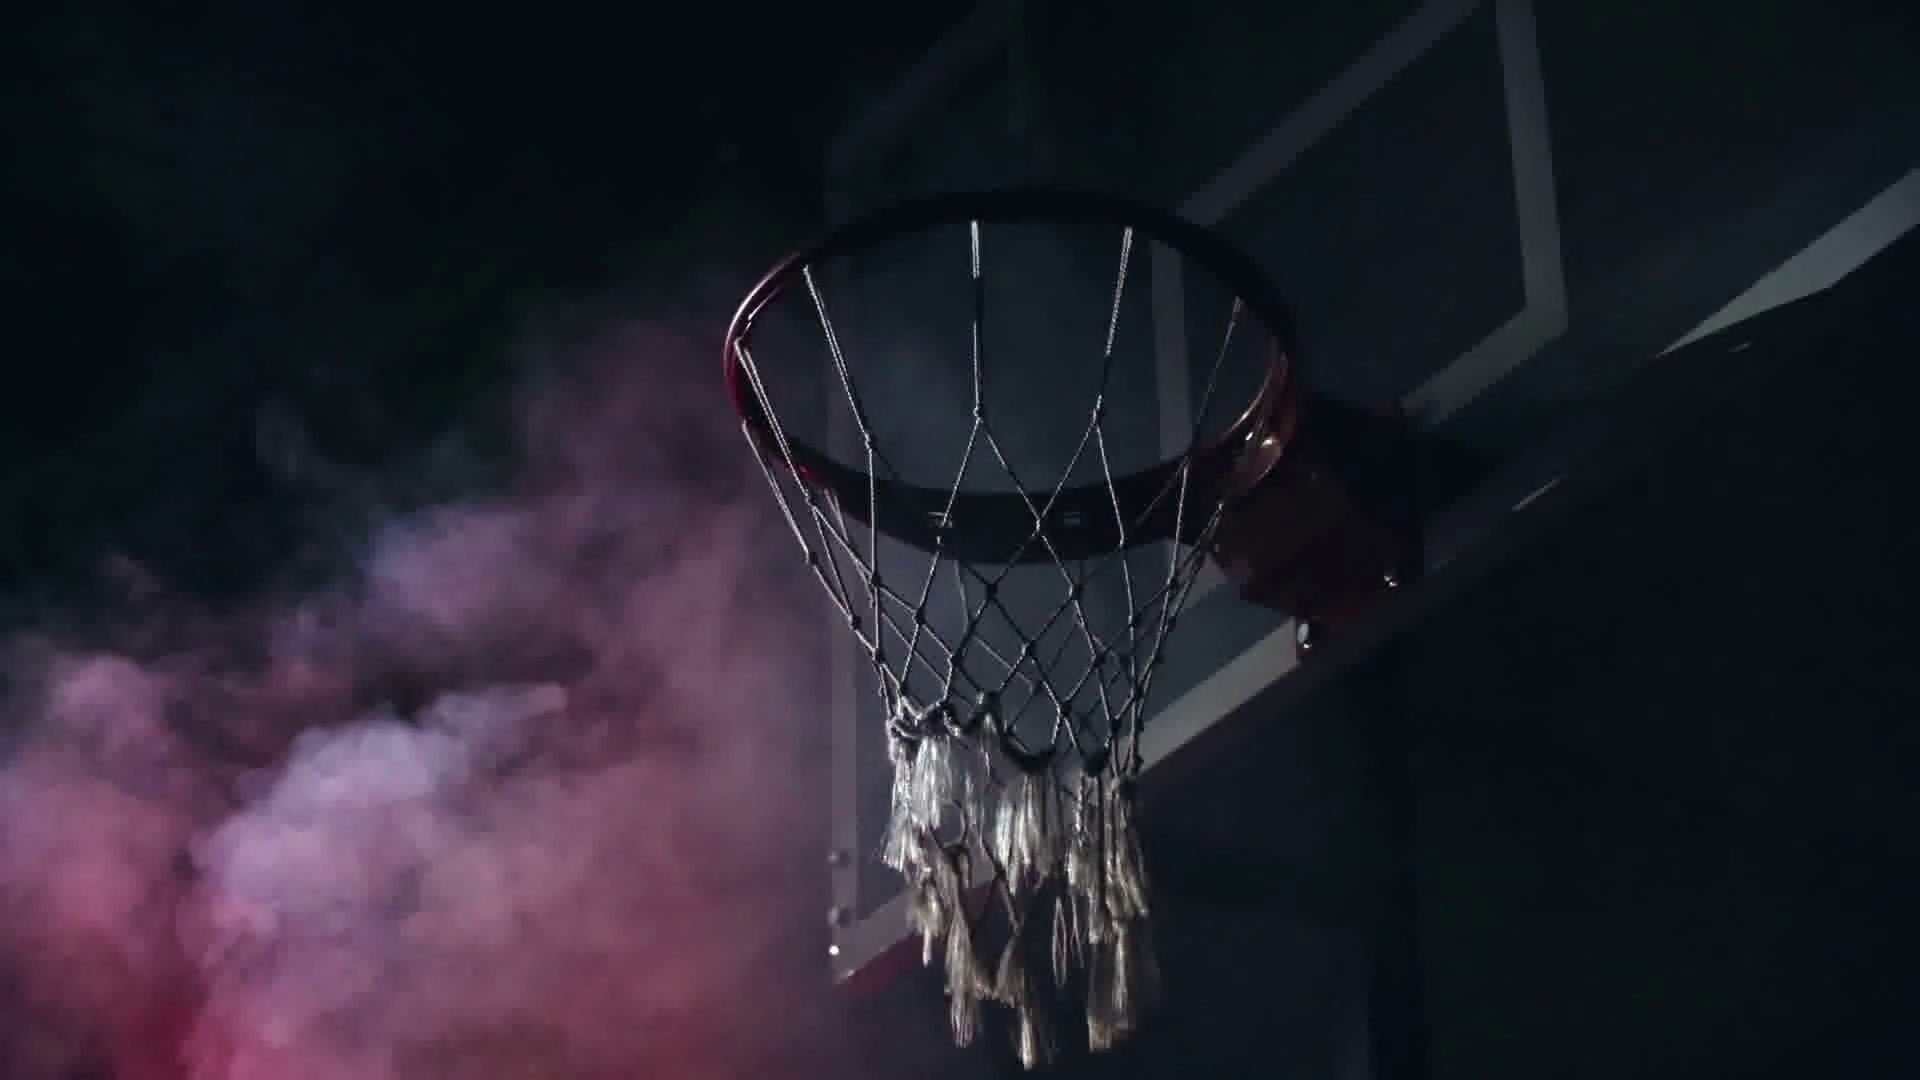 low-angle-view-of-man-throwing-ball-into-basketball-hoop-in-slow-motion-in-the-darkness-with-red-smoke-in-the-background_h9lddux3s_thumbnail-full01